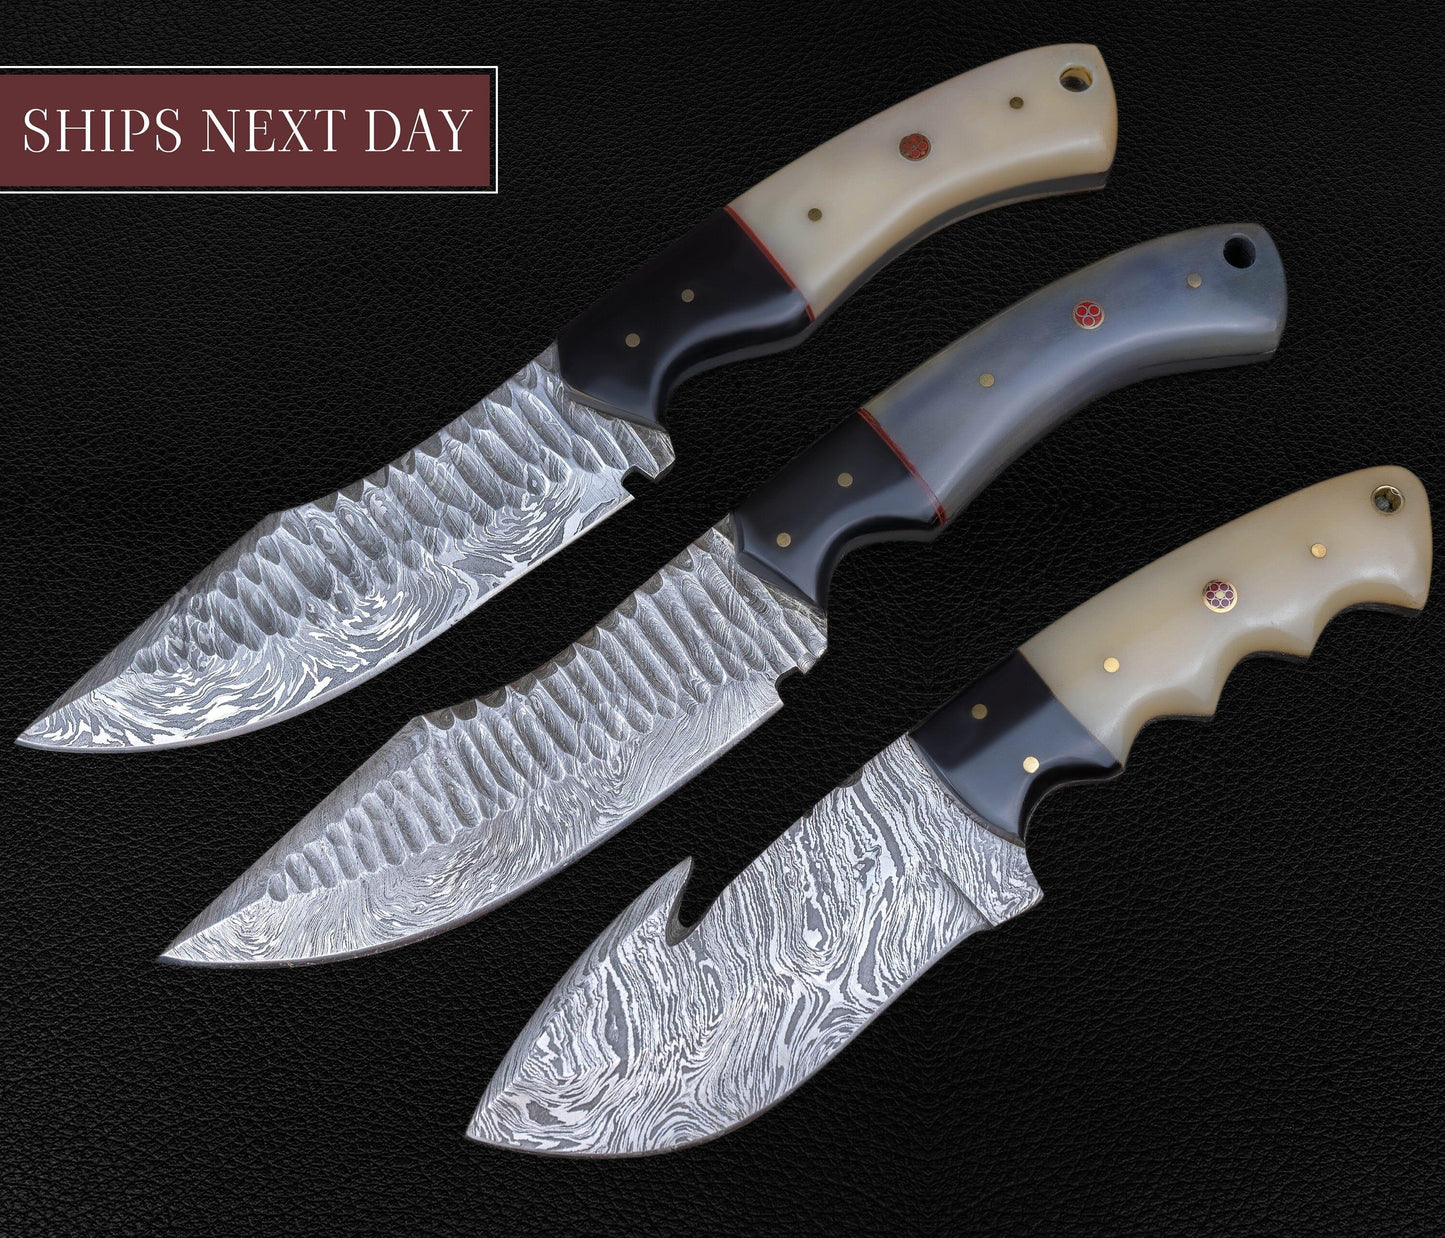 Damascus Hunting Knife, Damascus Fixed Blade Knife, Damascus Gut Hook Knife, Damascus Skinner Knife Hand Made Knives Gifts For Men USA 2021 Etsy 